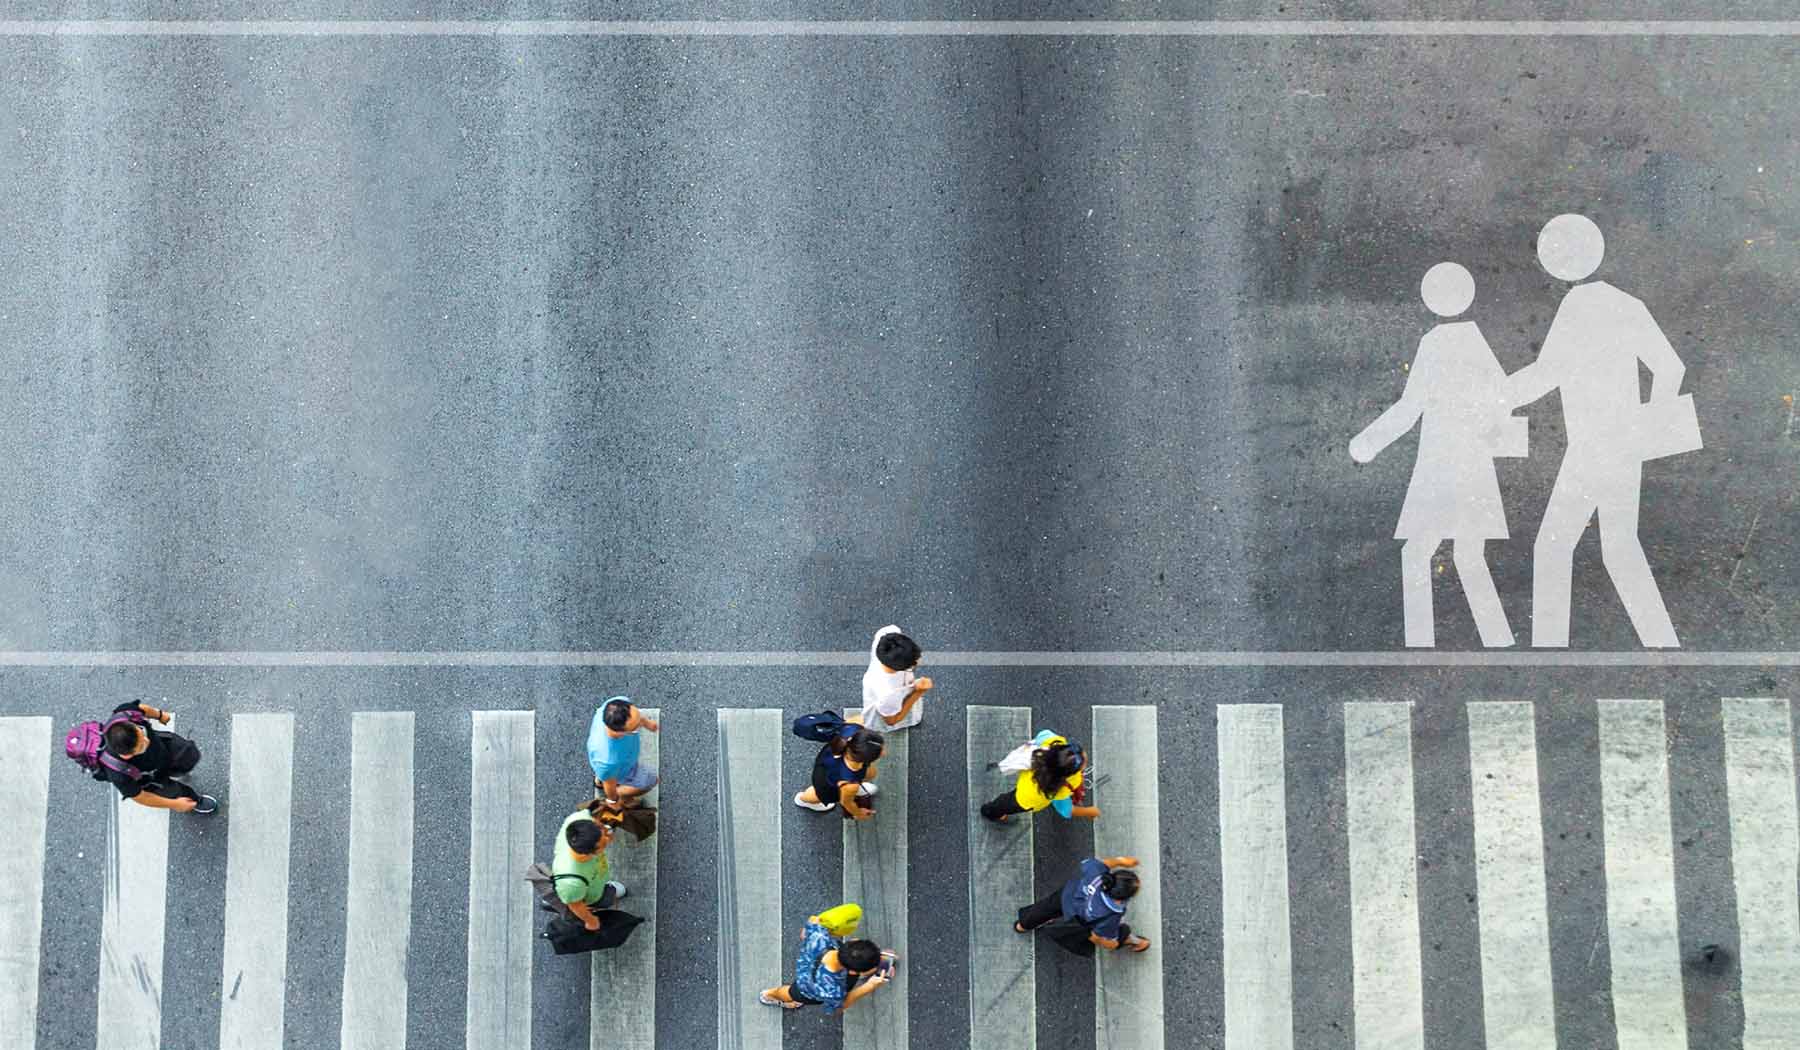 Looking down from above at people crossing a white-striped crosswalk